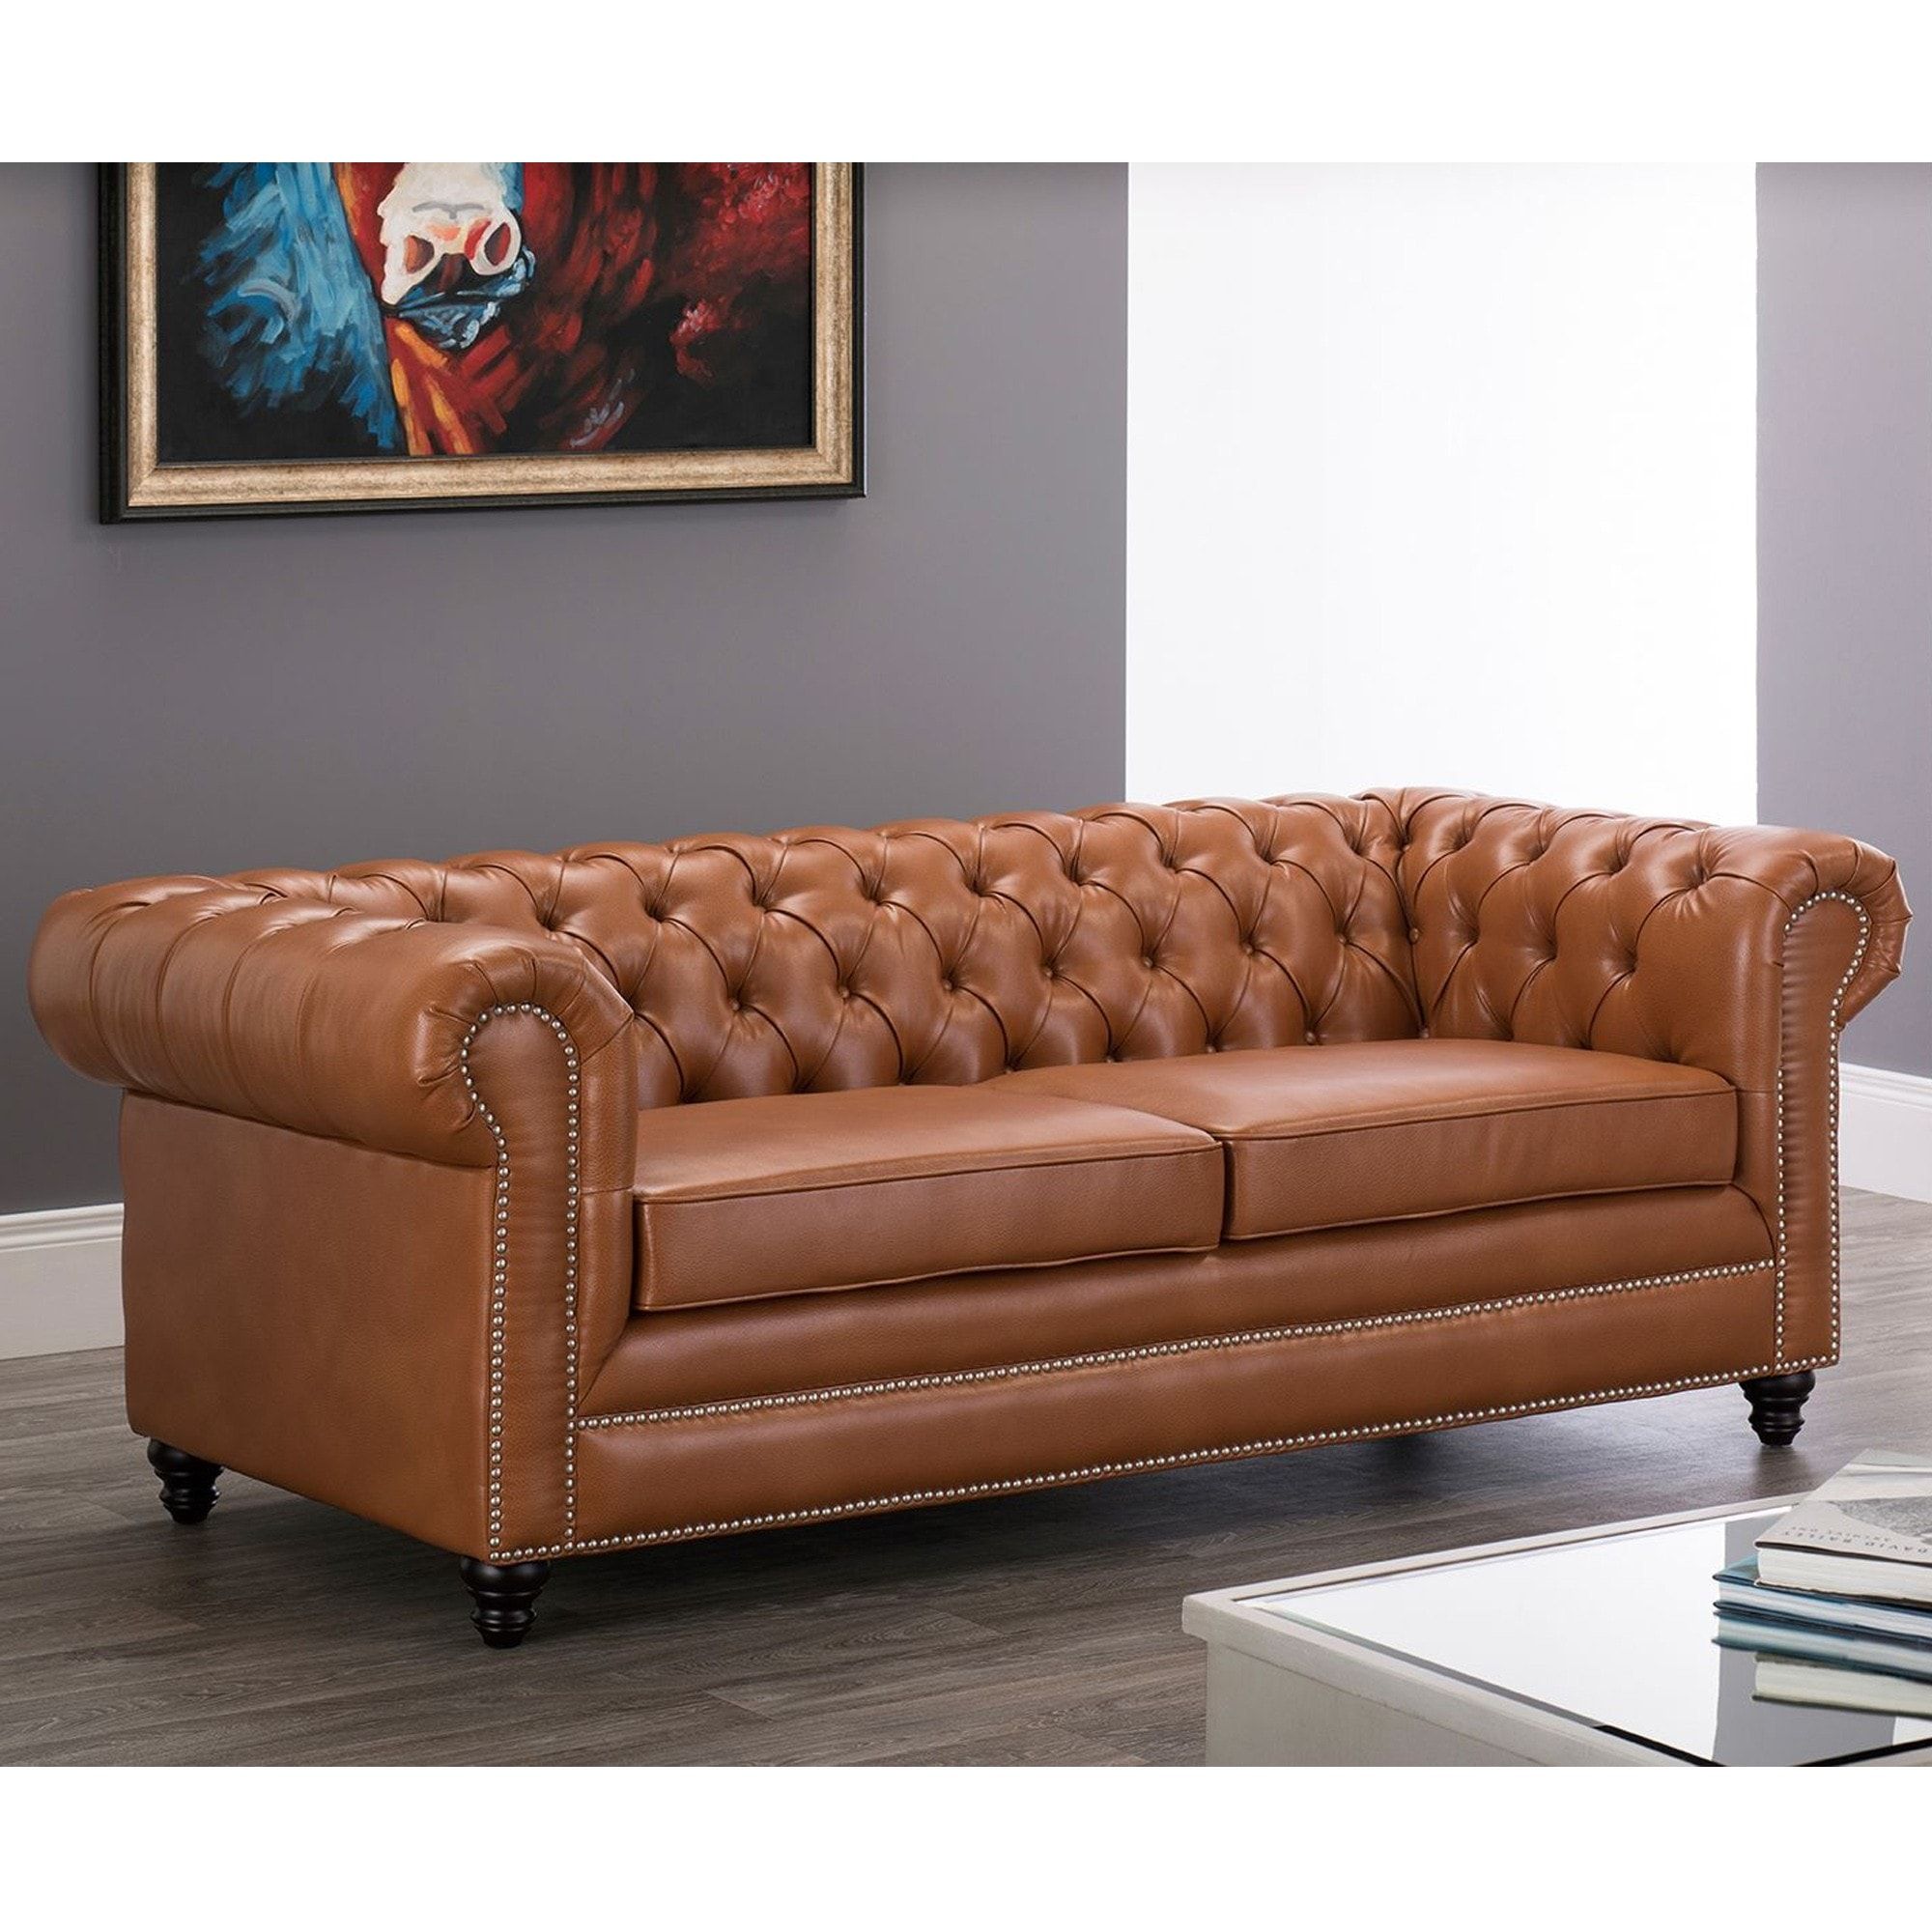 Faux Leather Chesterfield 3 Seater Sofa Tan | Tan Chesterfield Sofa Regarding Faux Leather Sofas (View 3 of 21)